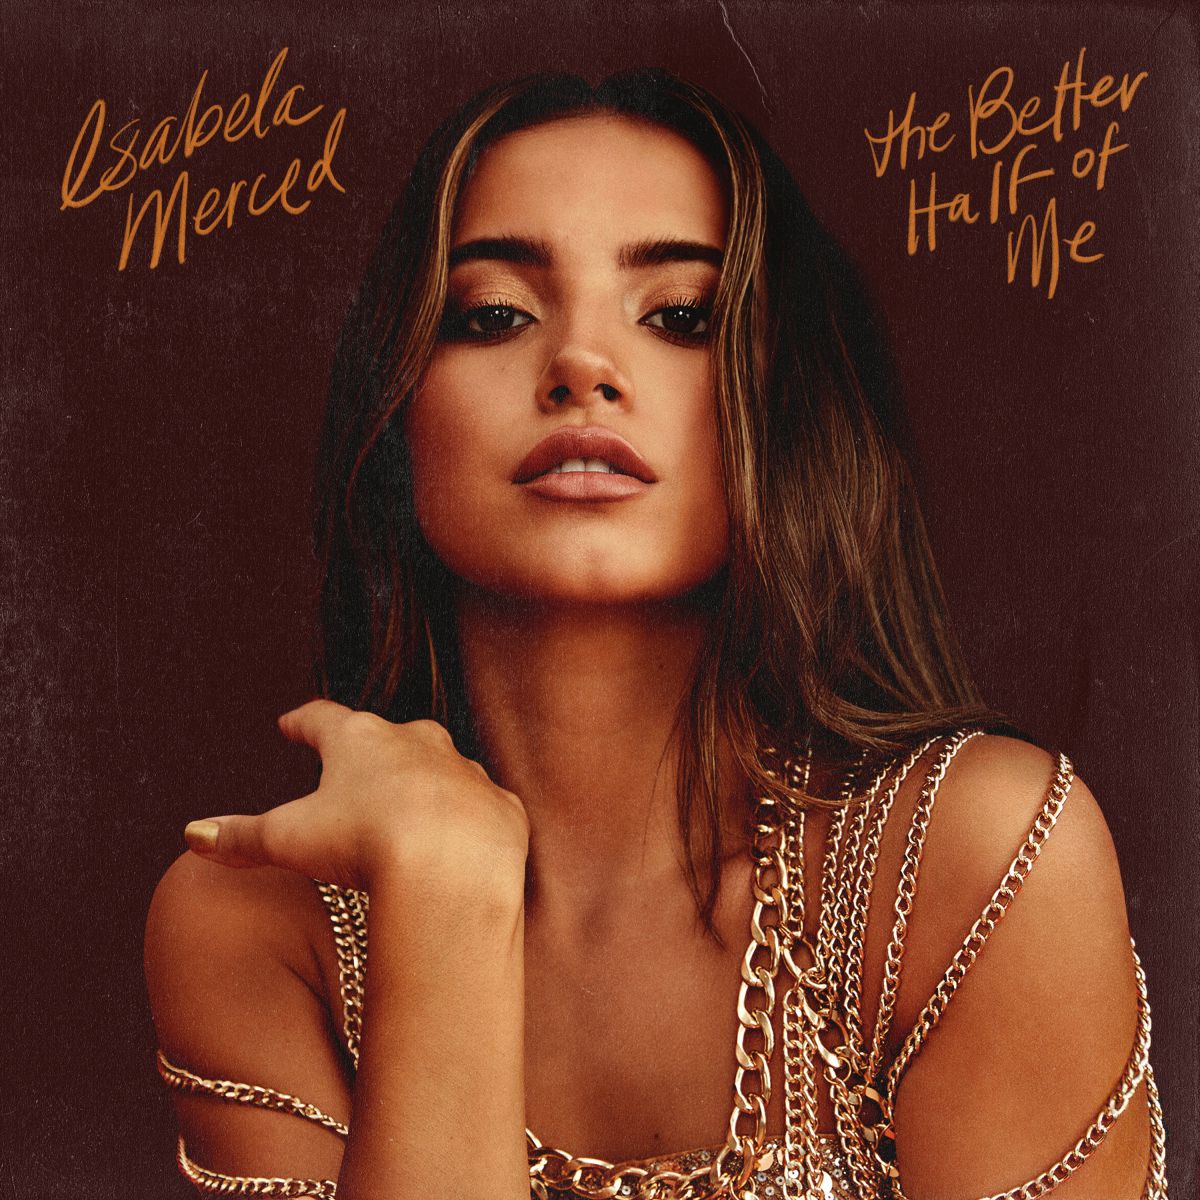 Isabela Merced - The Better Half of Me Cover, May 2020 